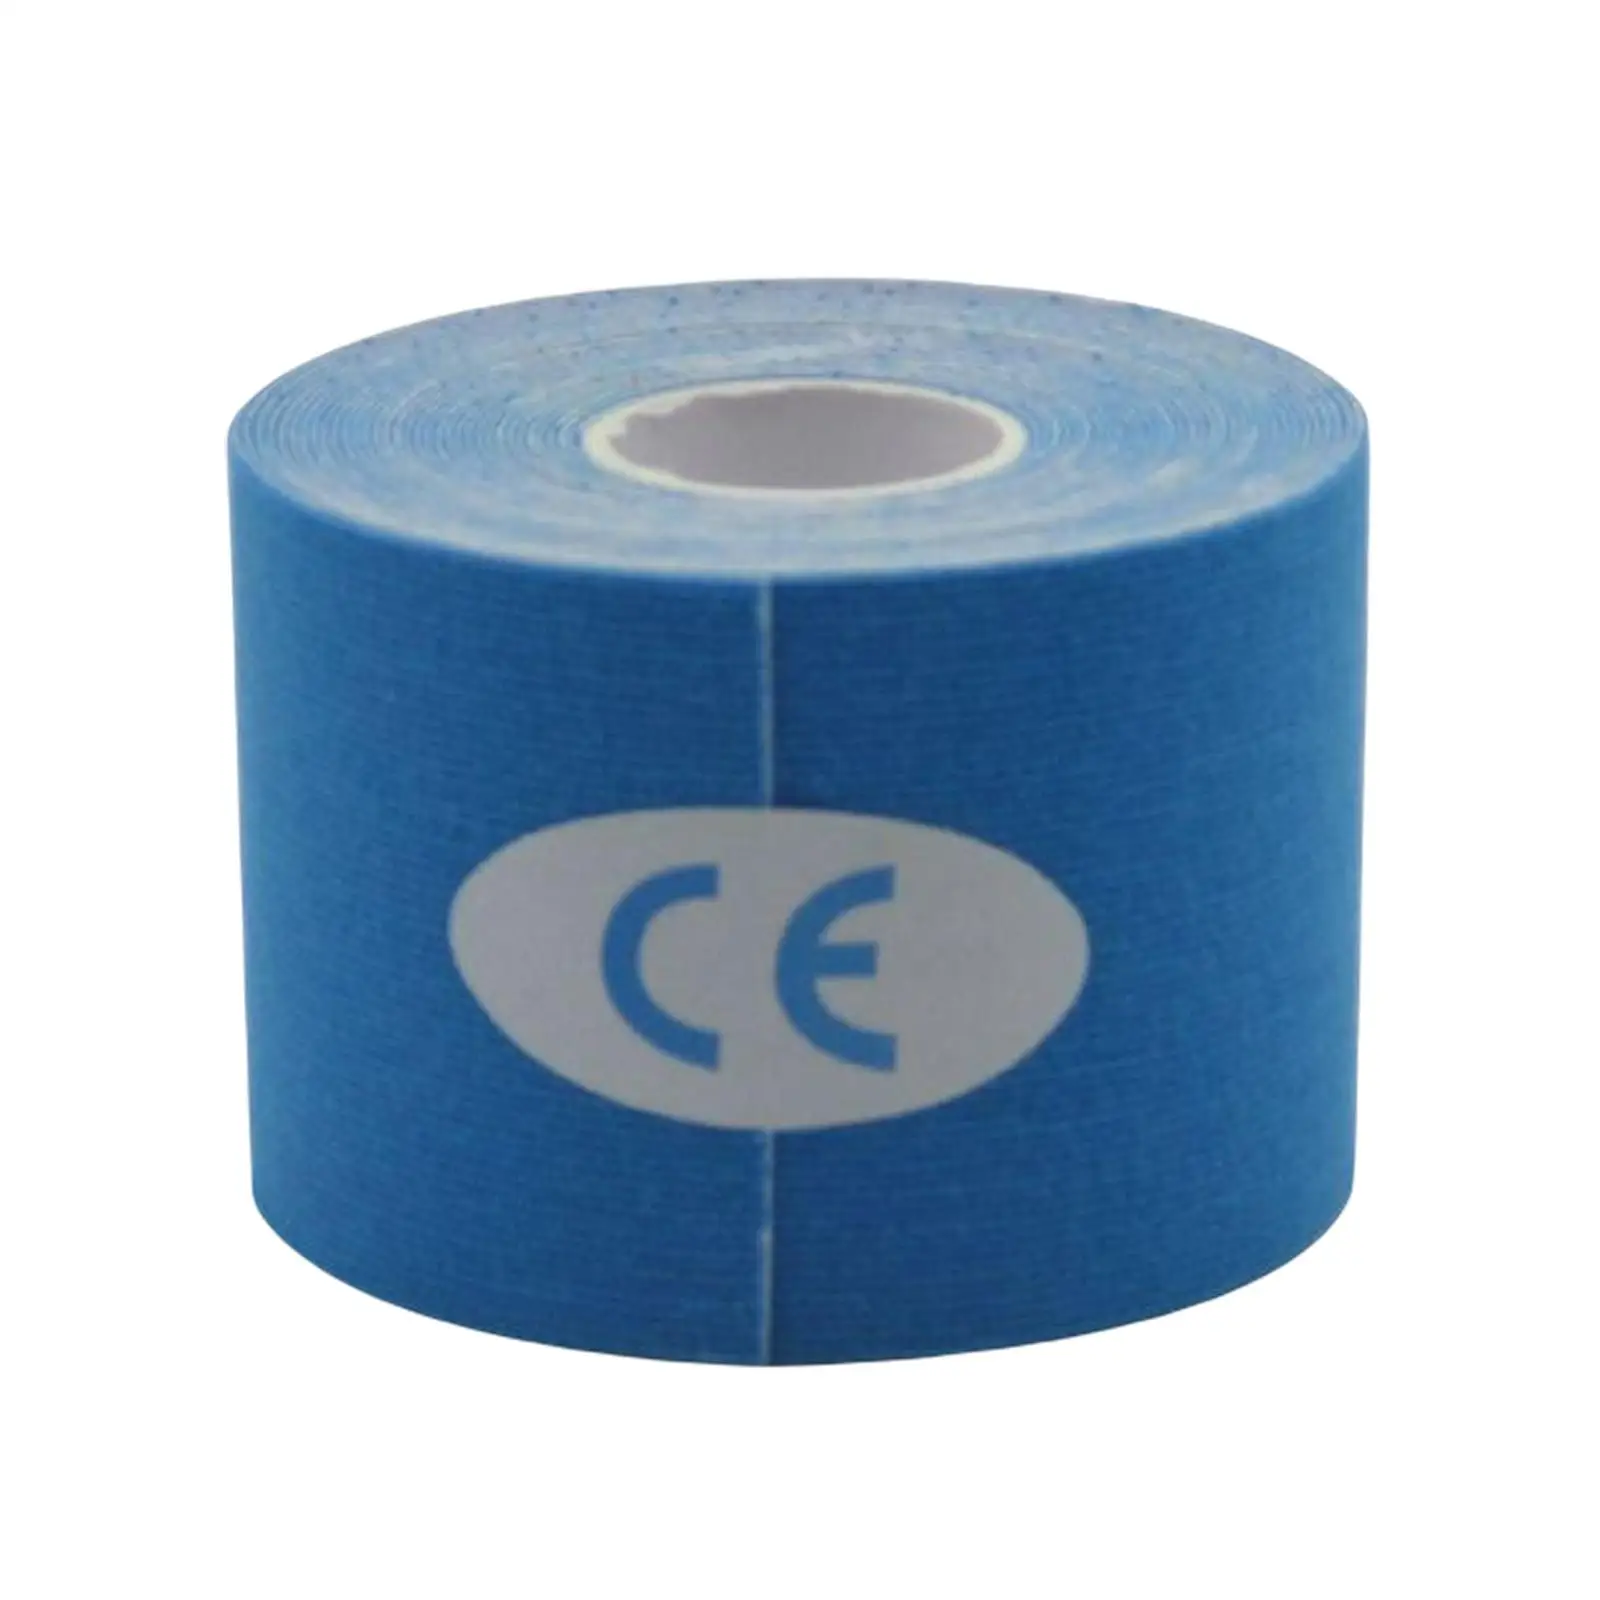 5M Tape for Sports Protective Tape Athletic Tape for Knee Shoulder Gym